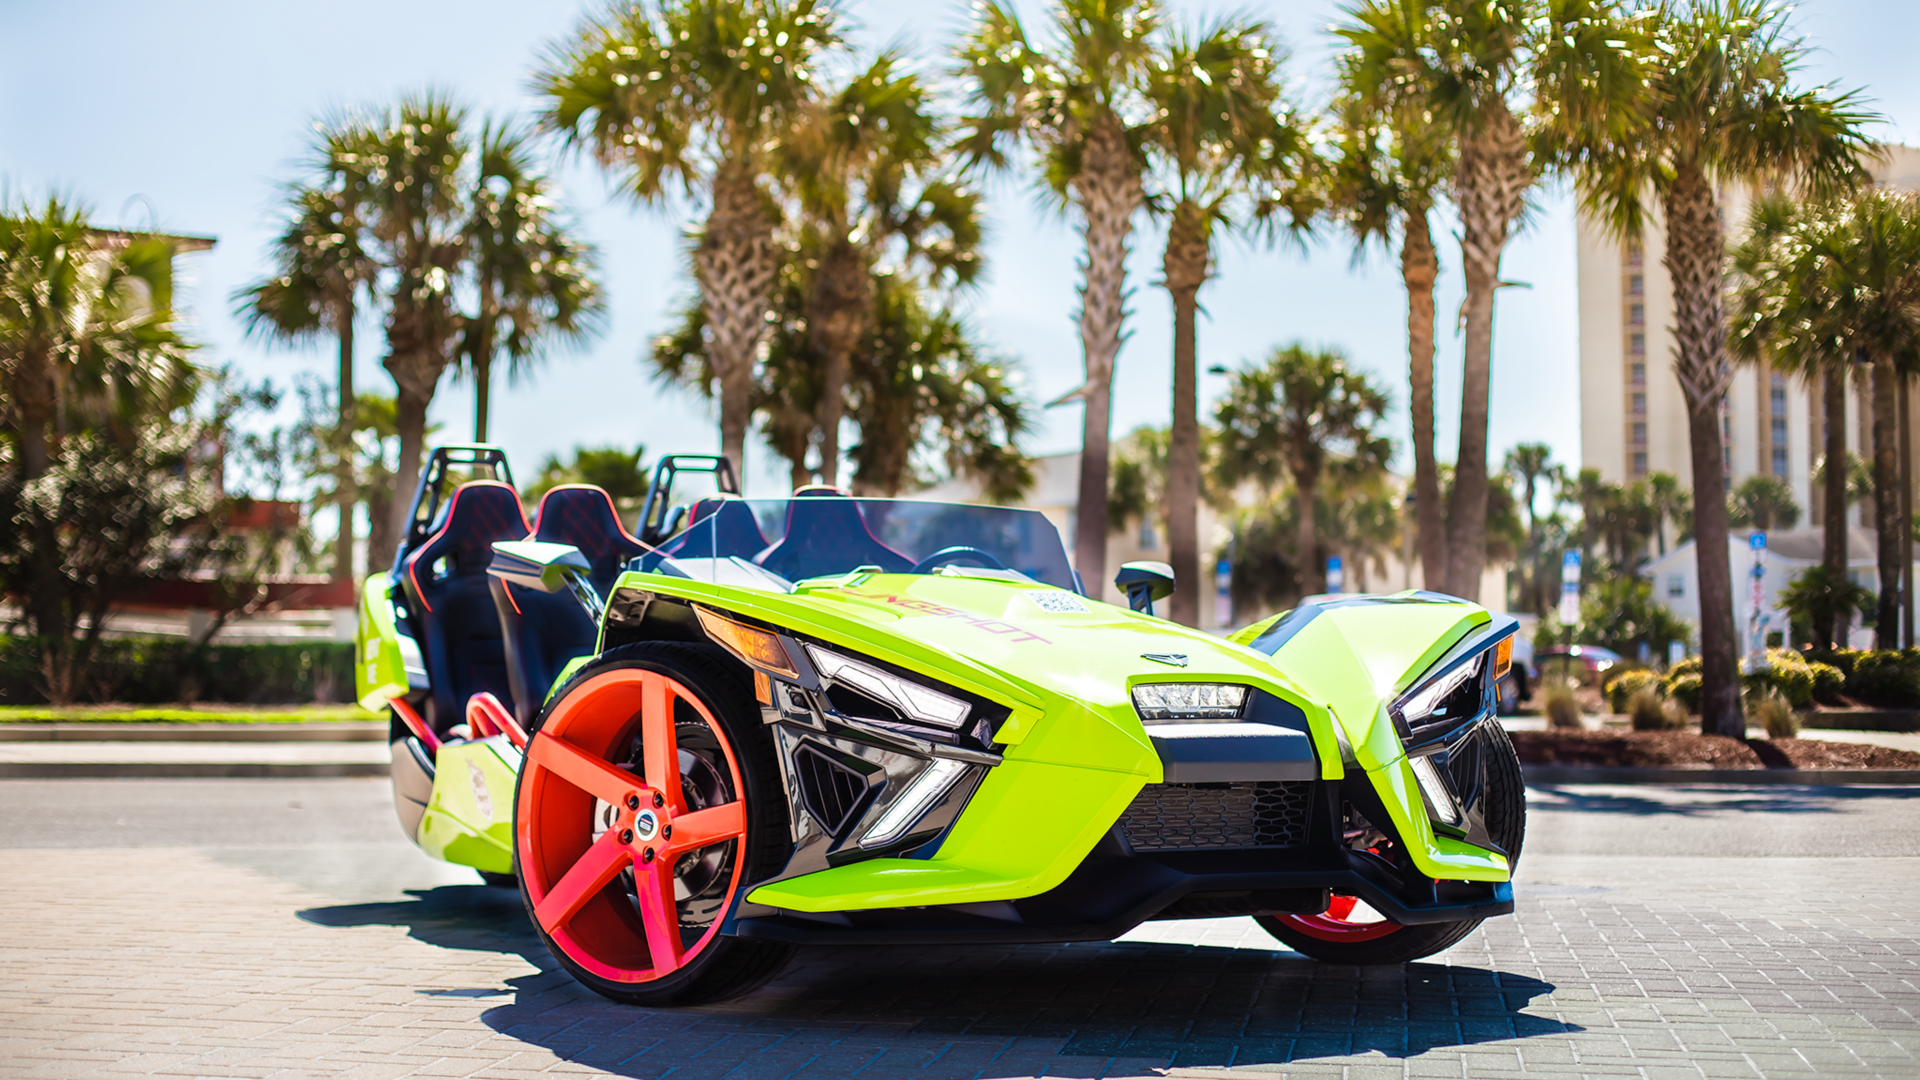 A green slingshot is parked on the side of the road in front of palm trees.